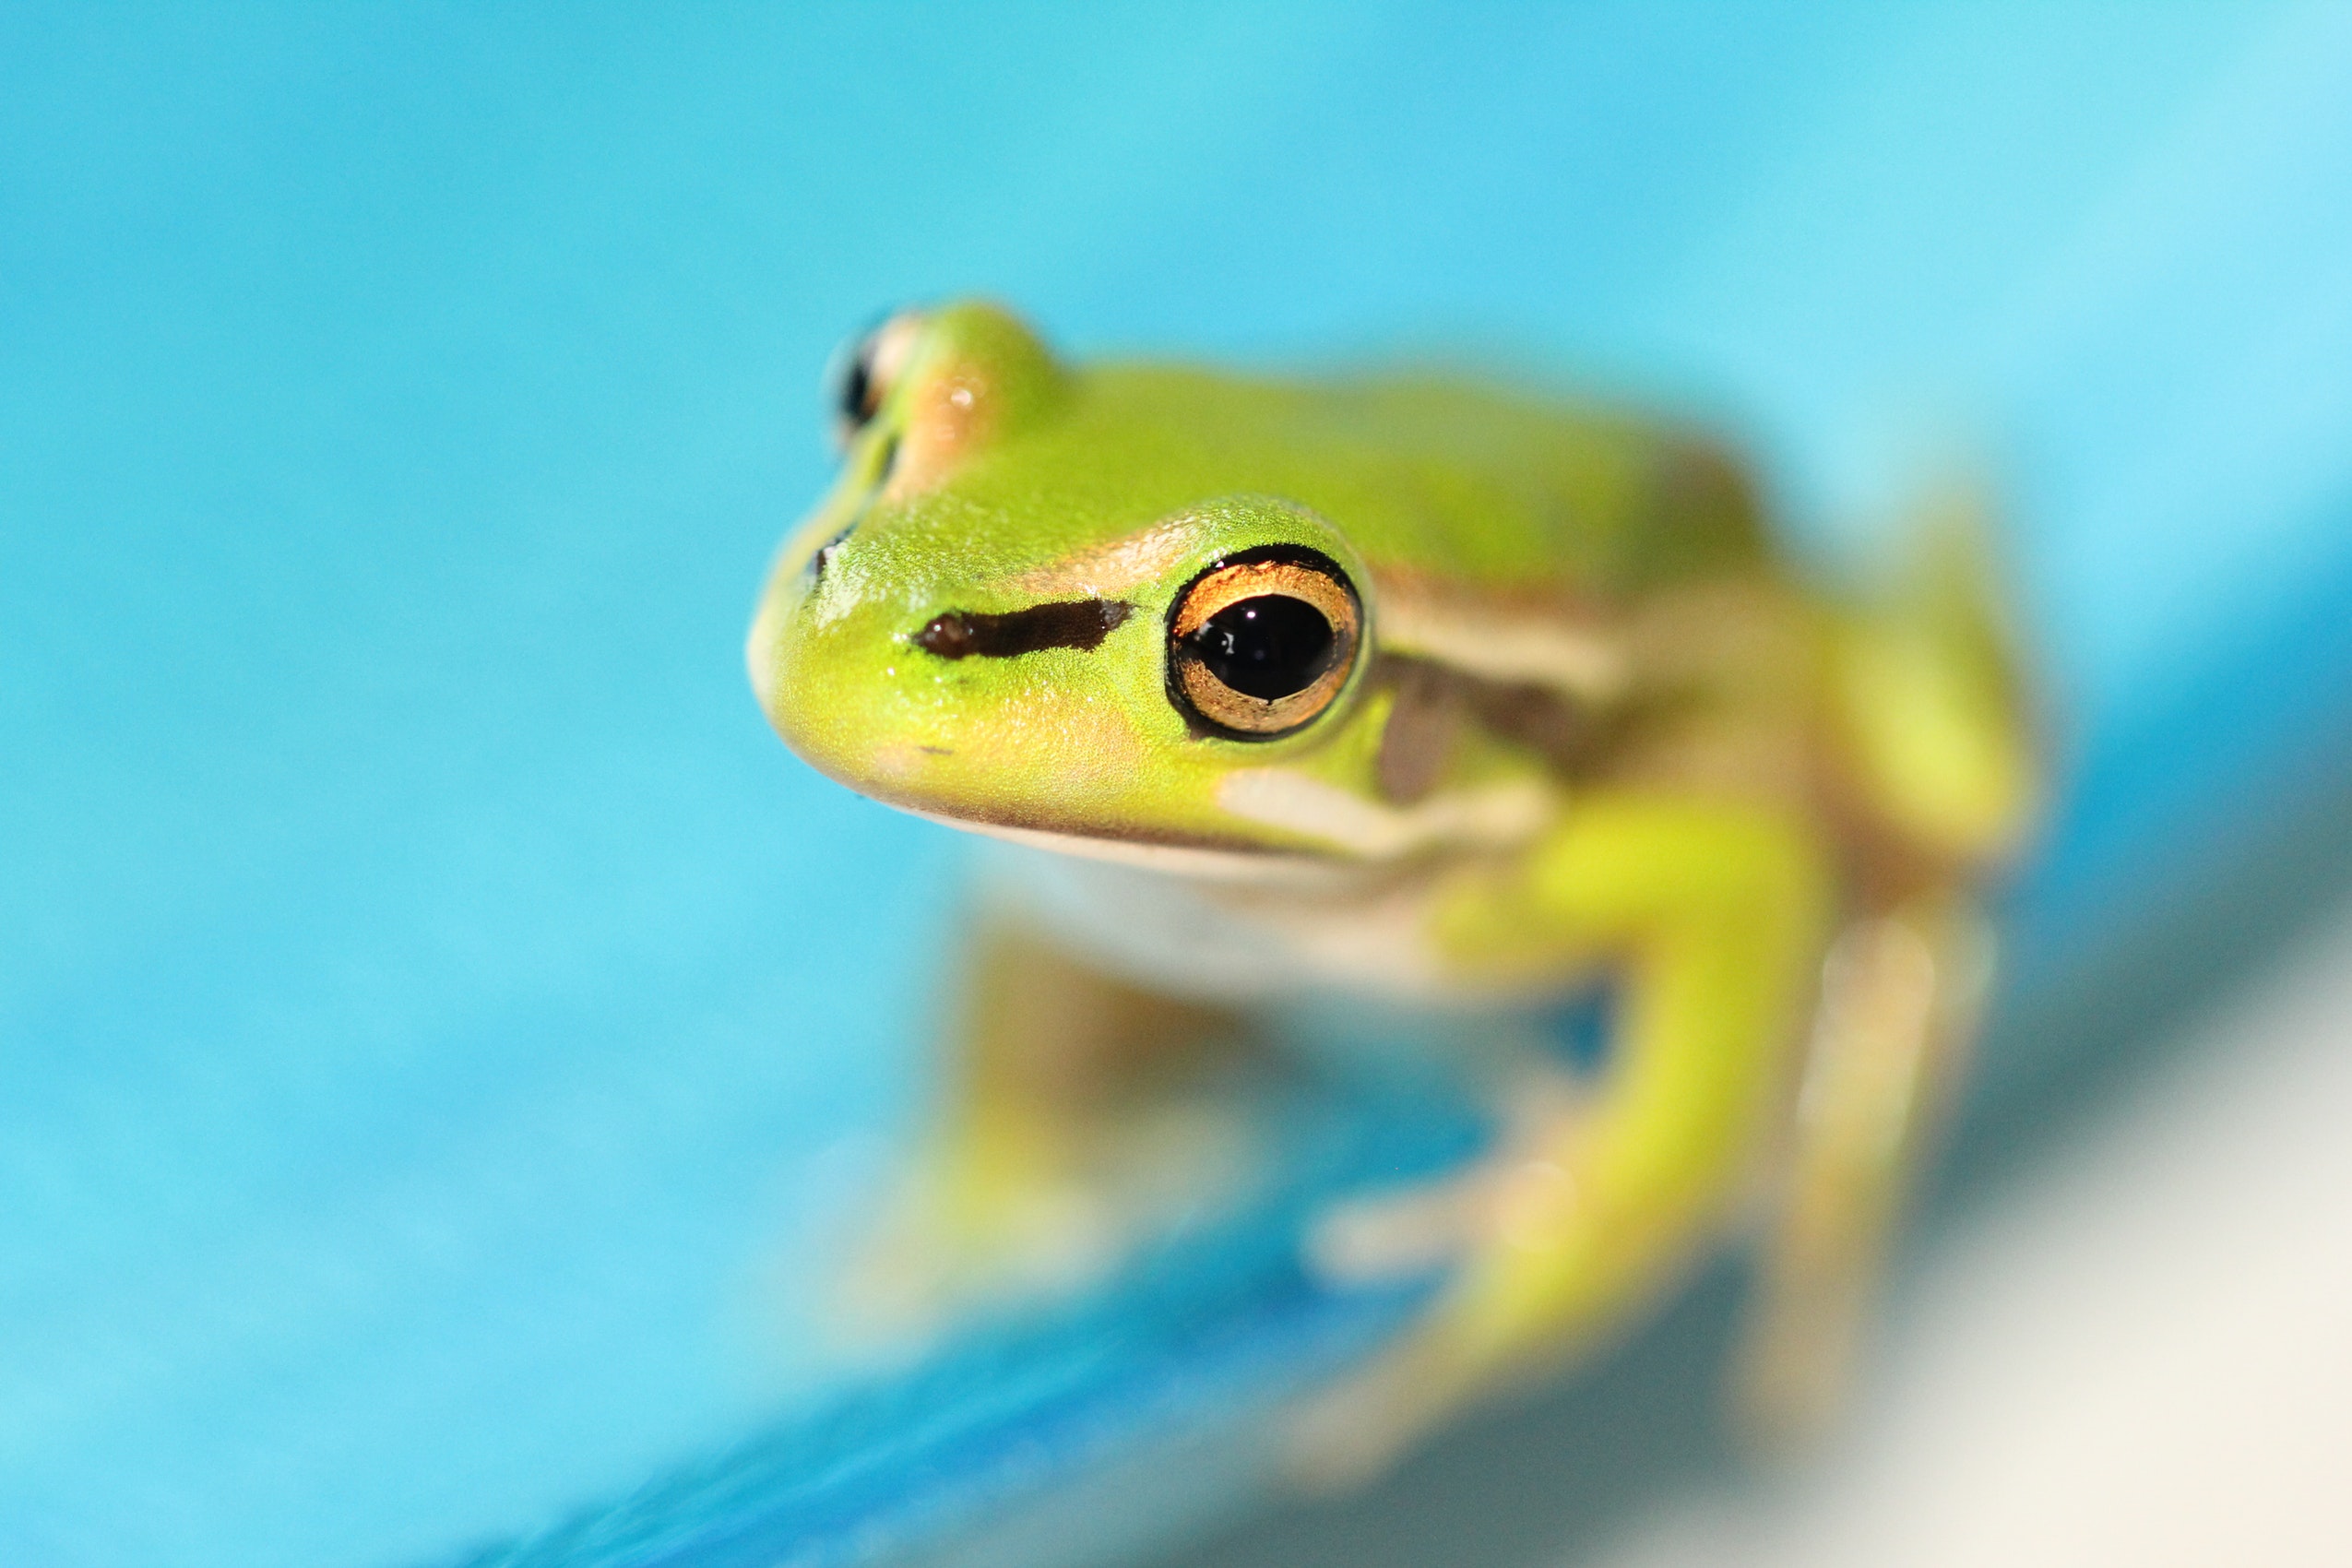 Green frog on blue surface.